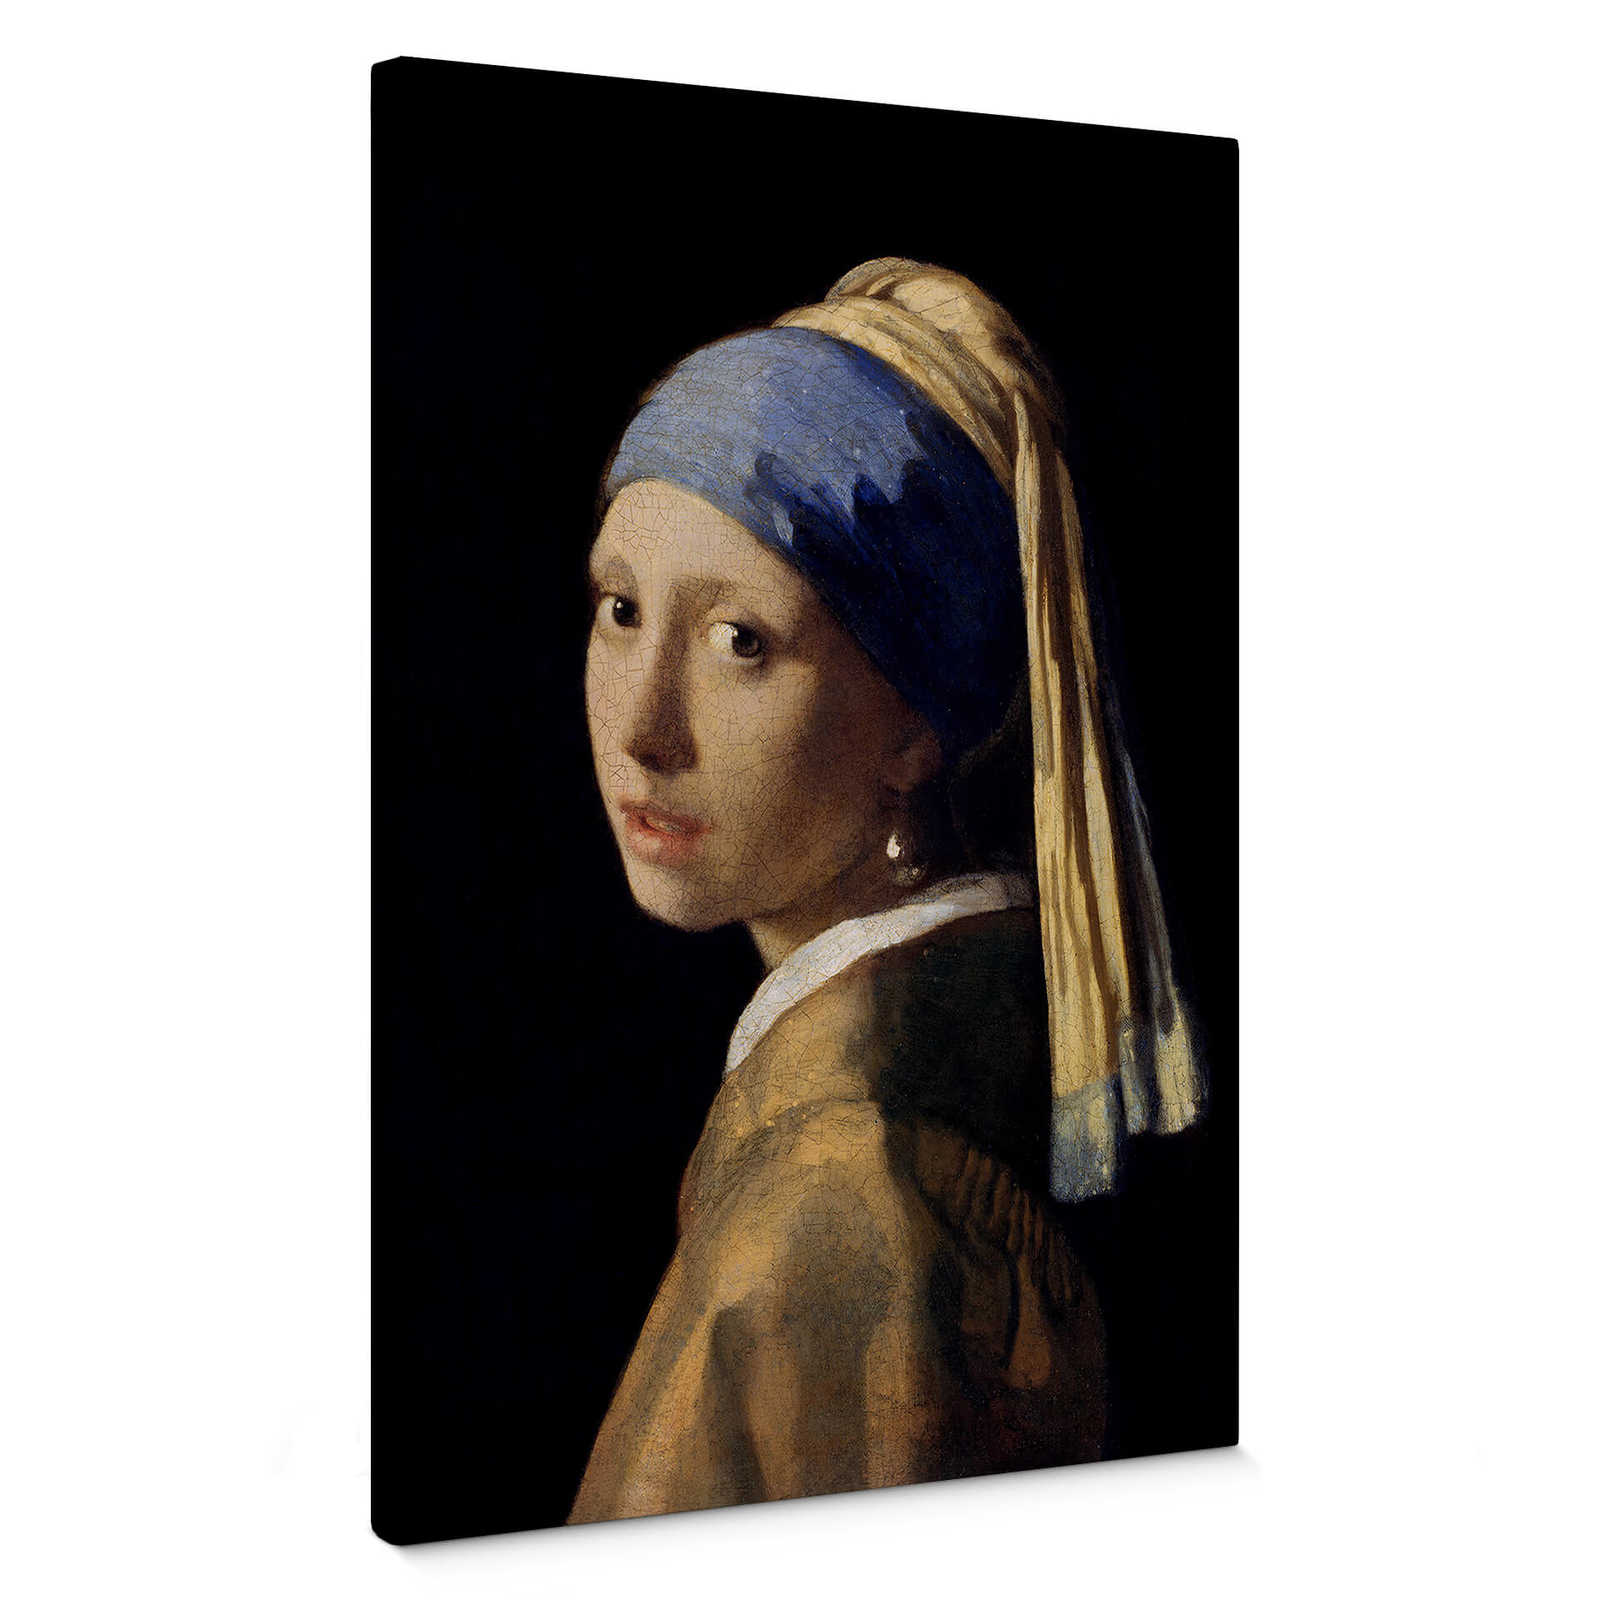         Canvas print "The girl with the pearl earring" by Dürer
    